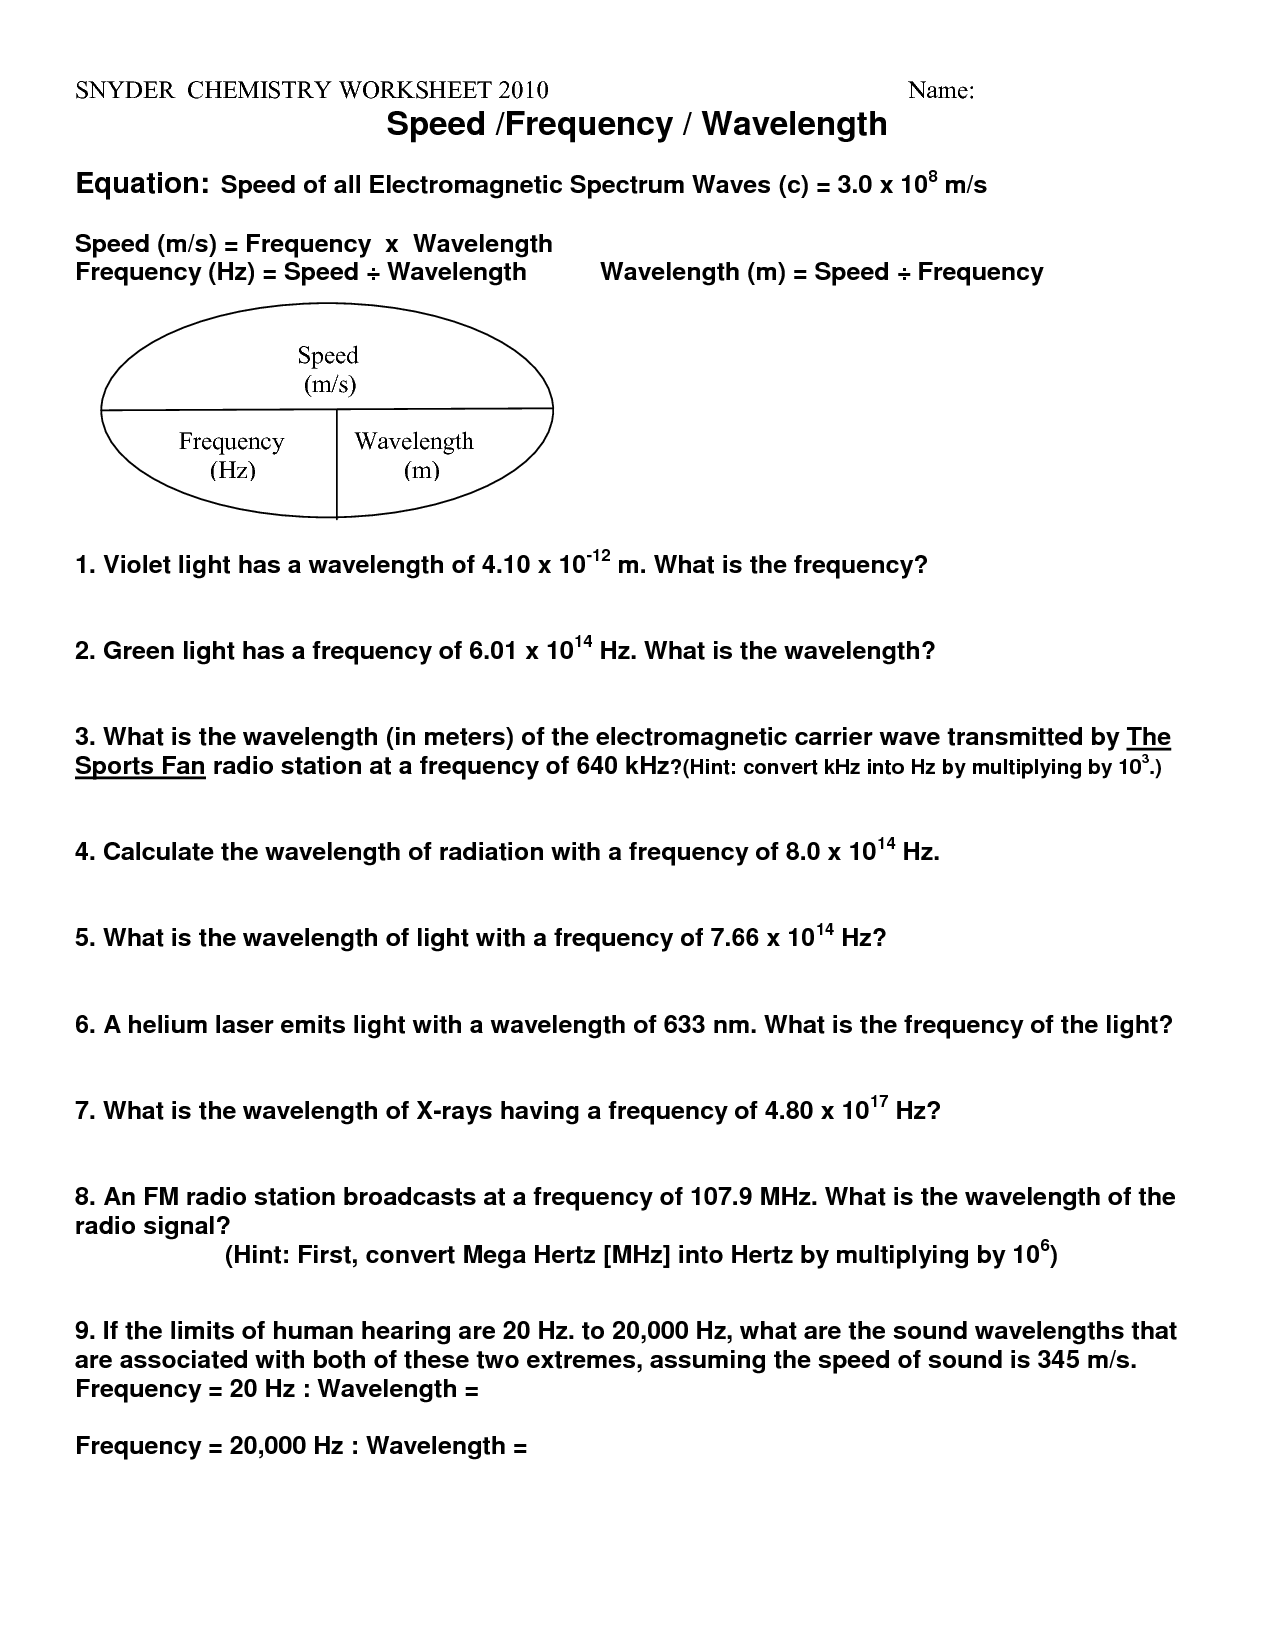 Snyders Chemistry Worksheet Energy Frequency Wavelength Answer